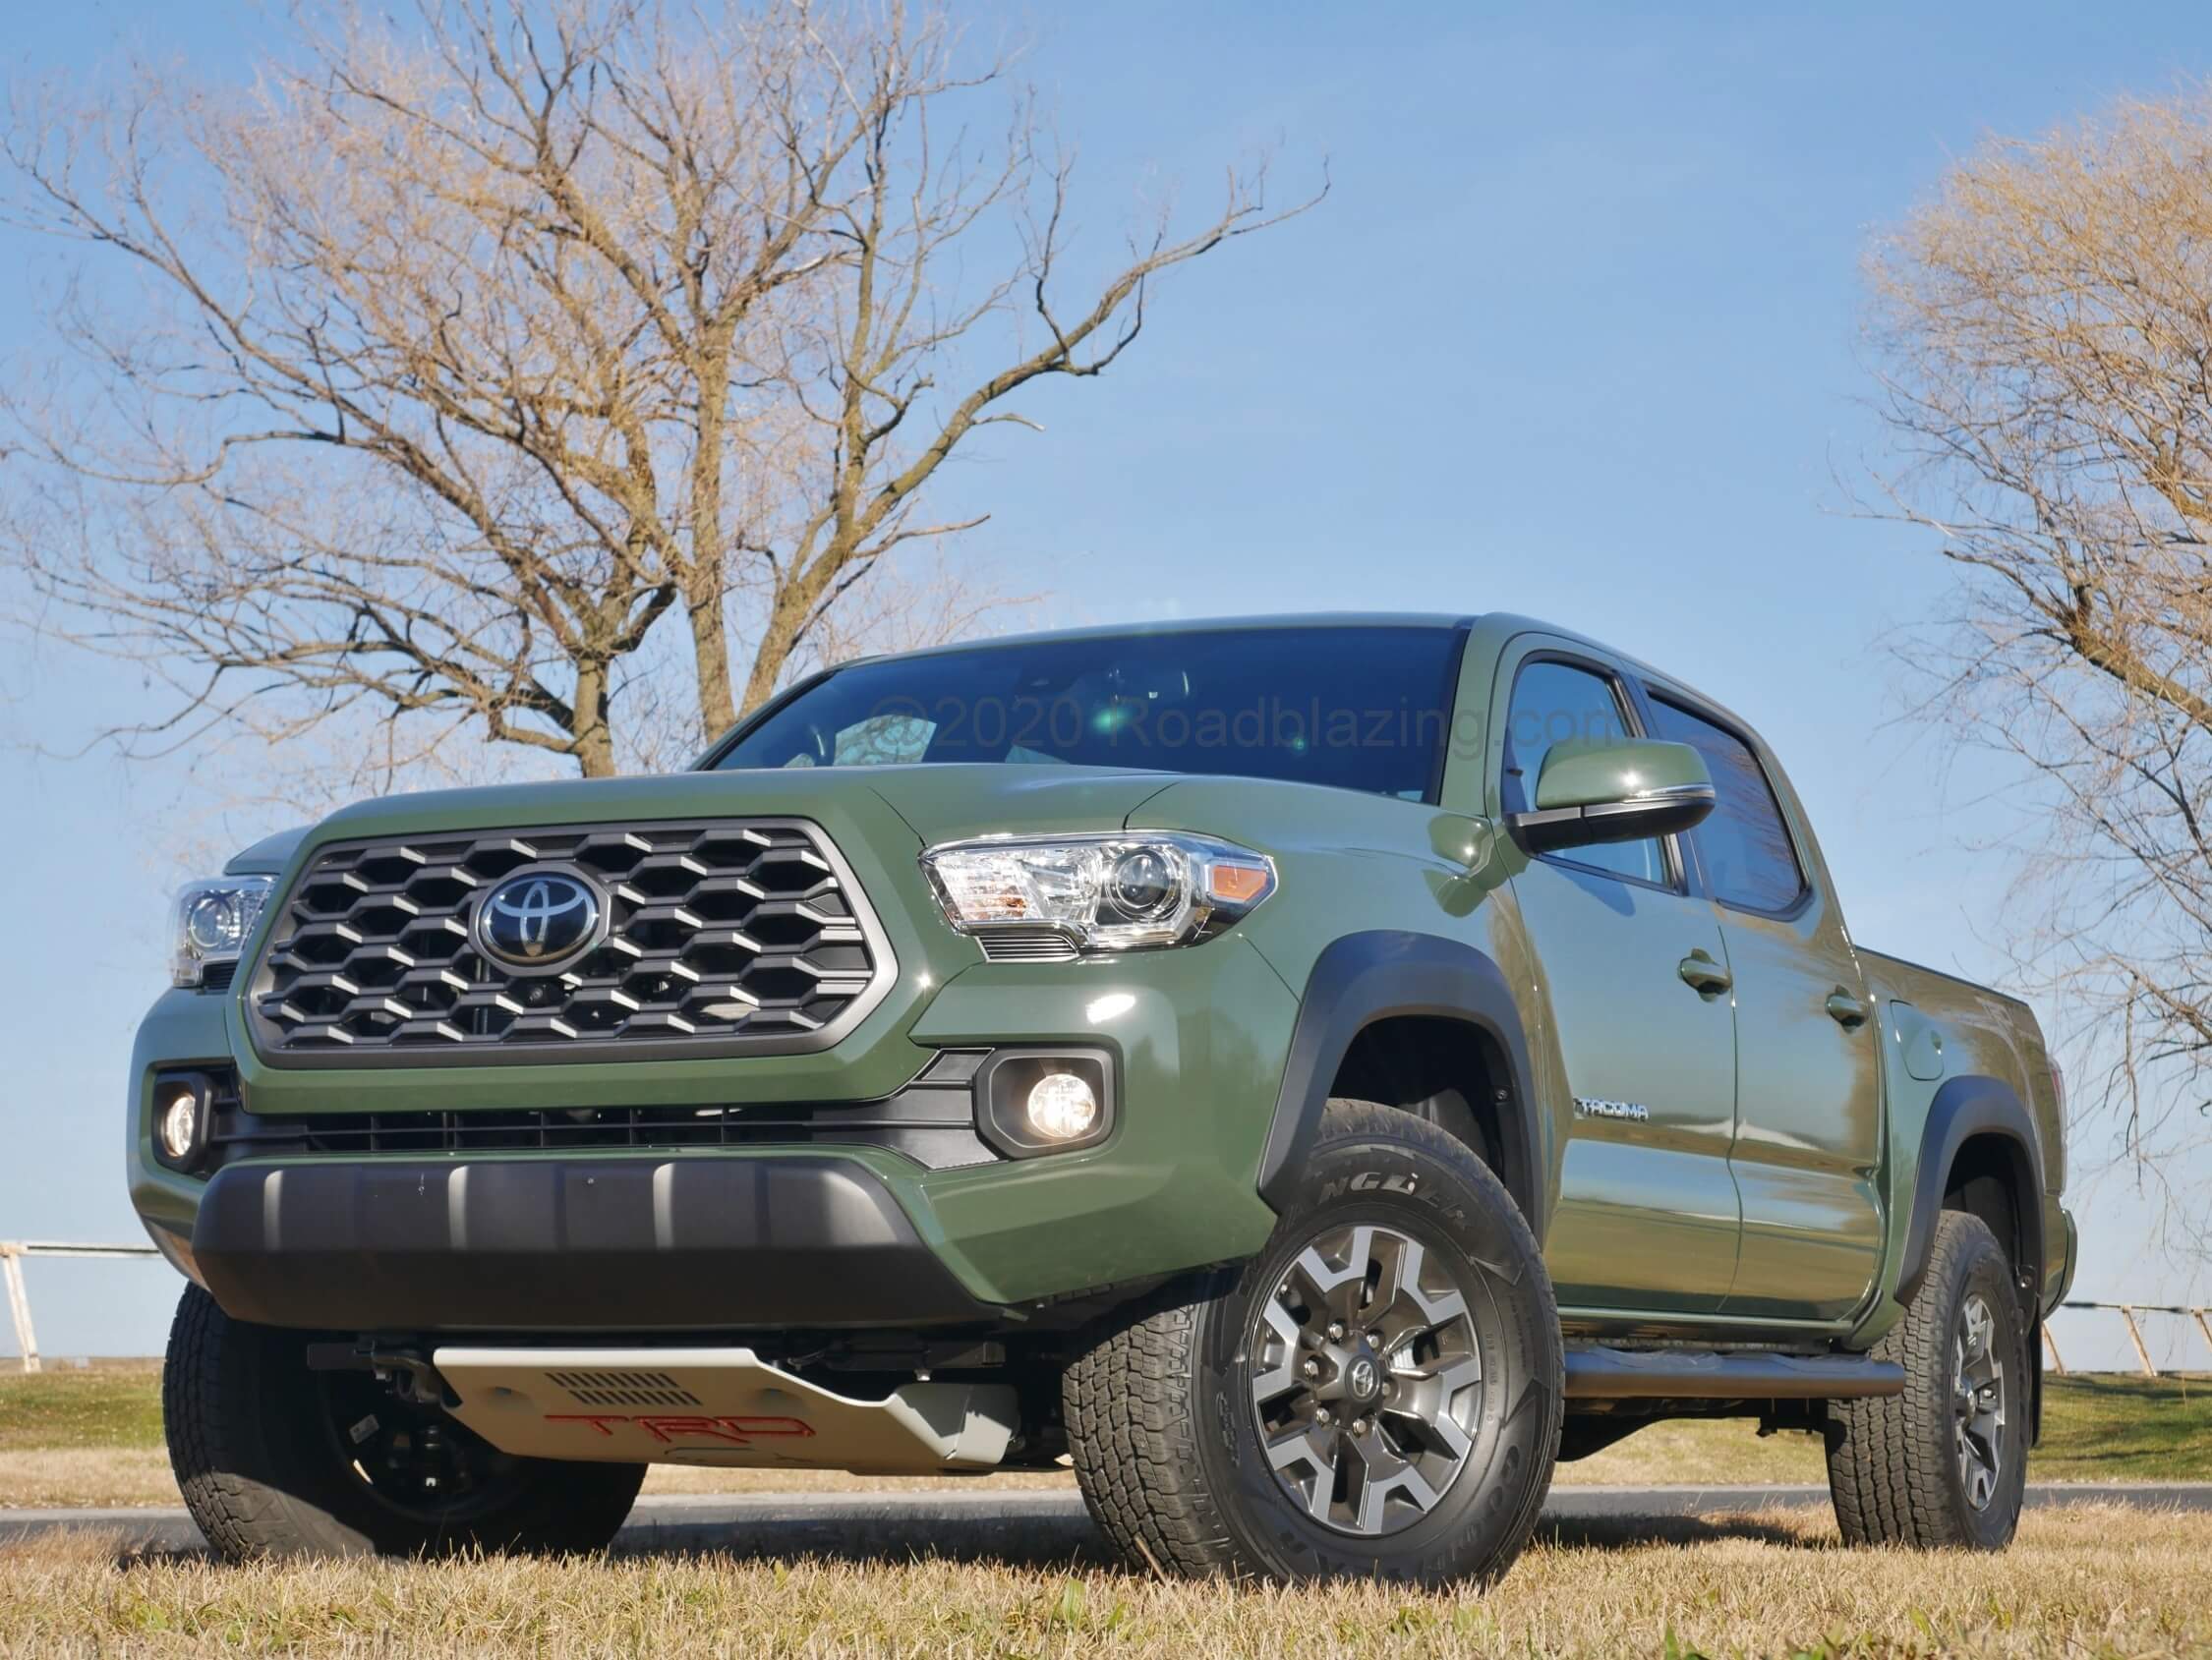 2021 Toyota Tacoma TRD Off Road: "C" LED DRL's encapsulate the swept back headlamps and grilles feature new lattice work.